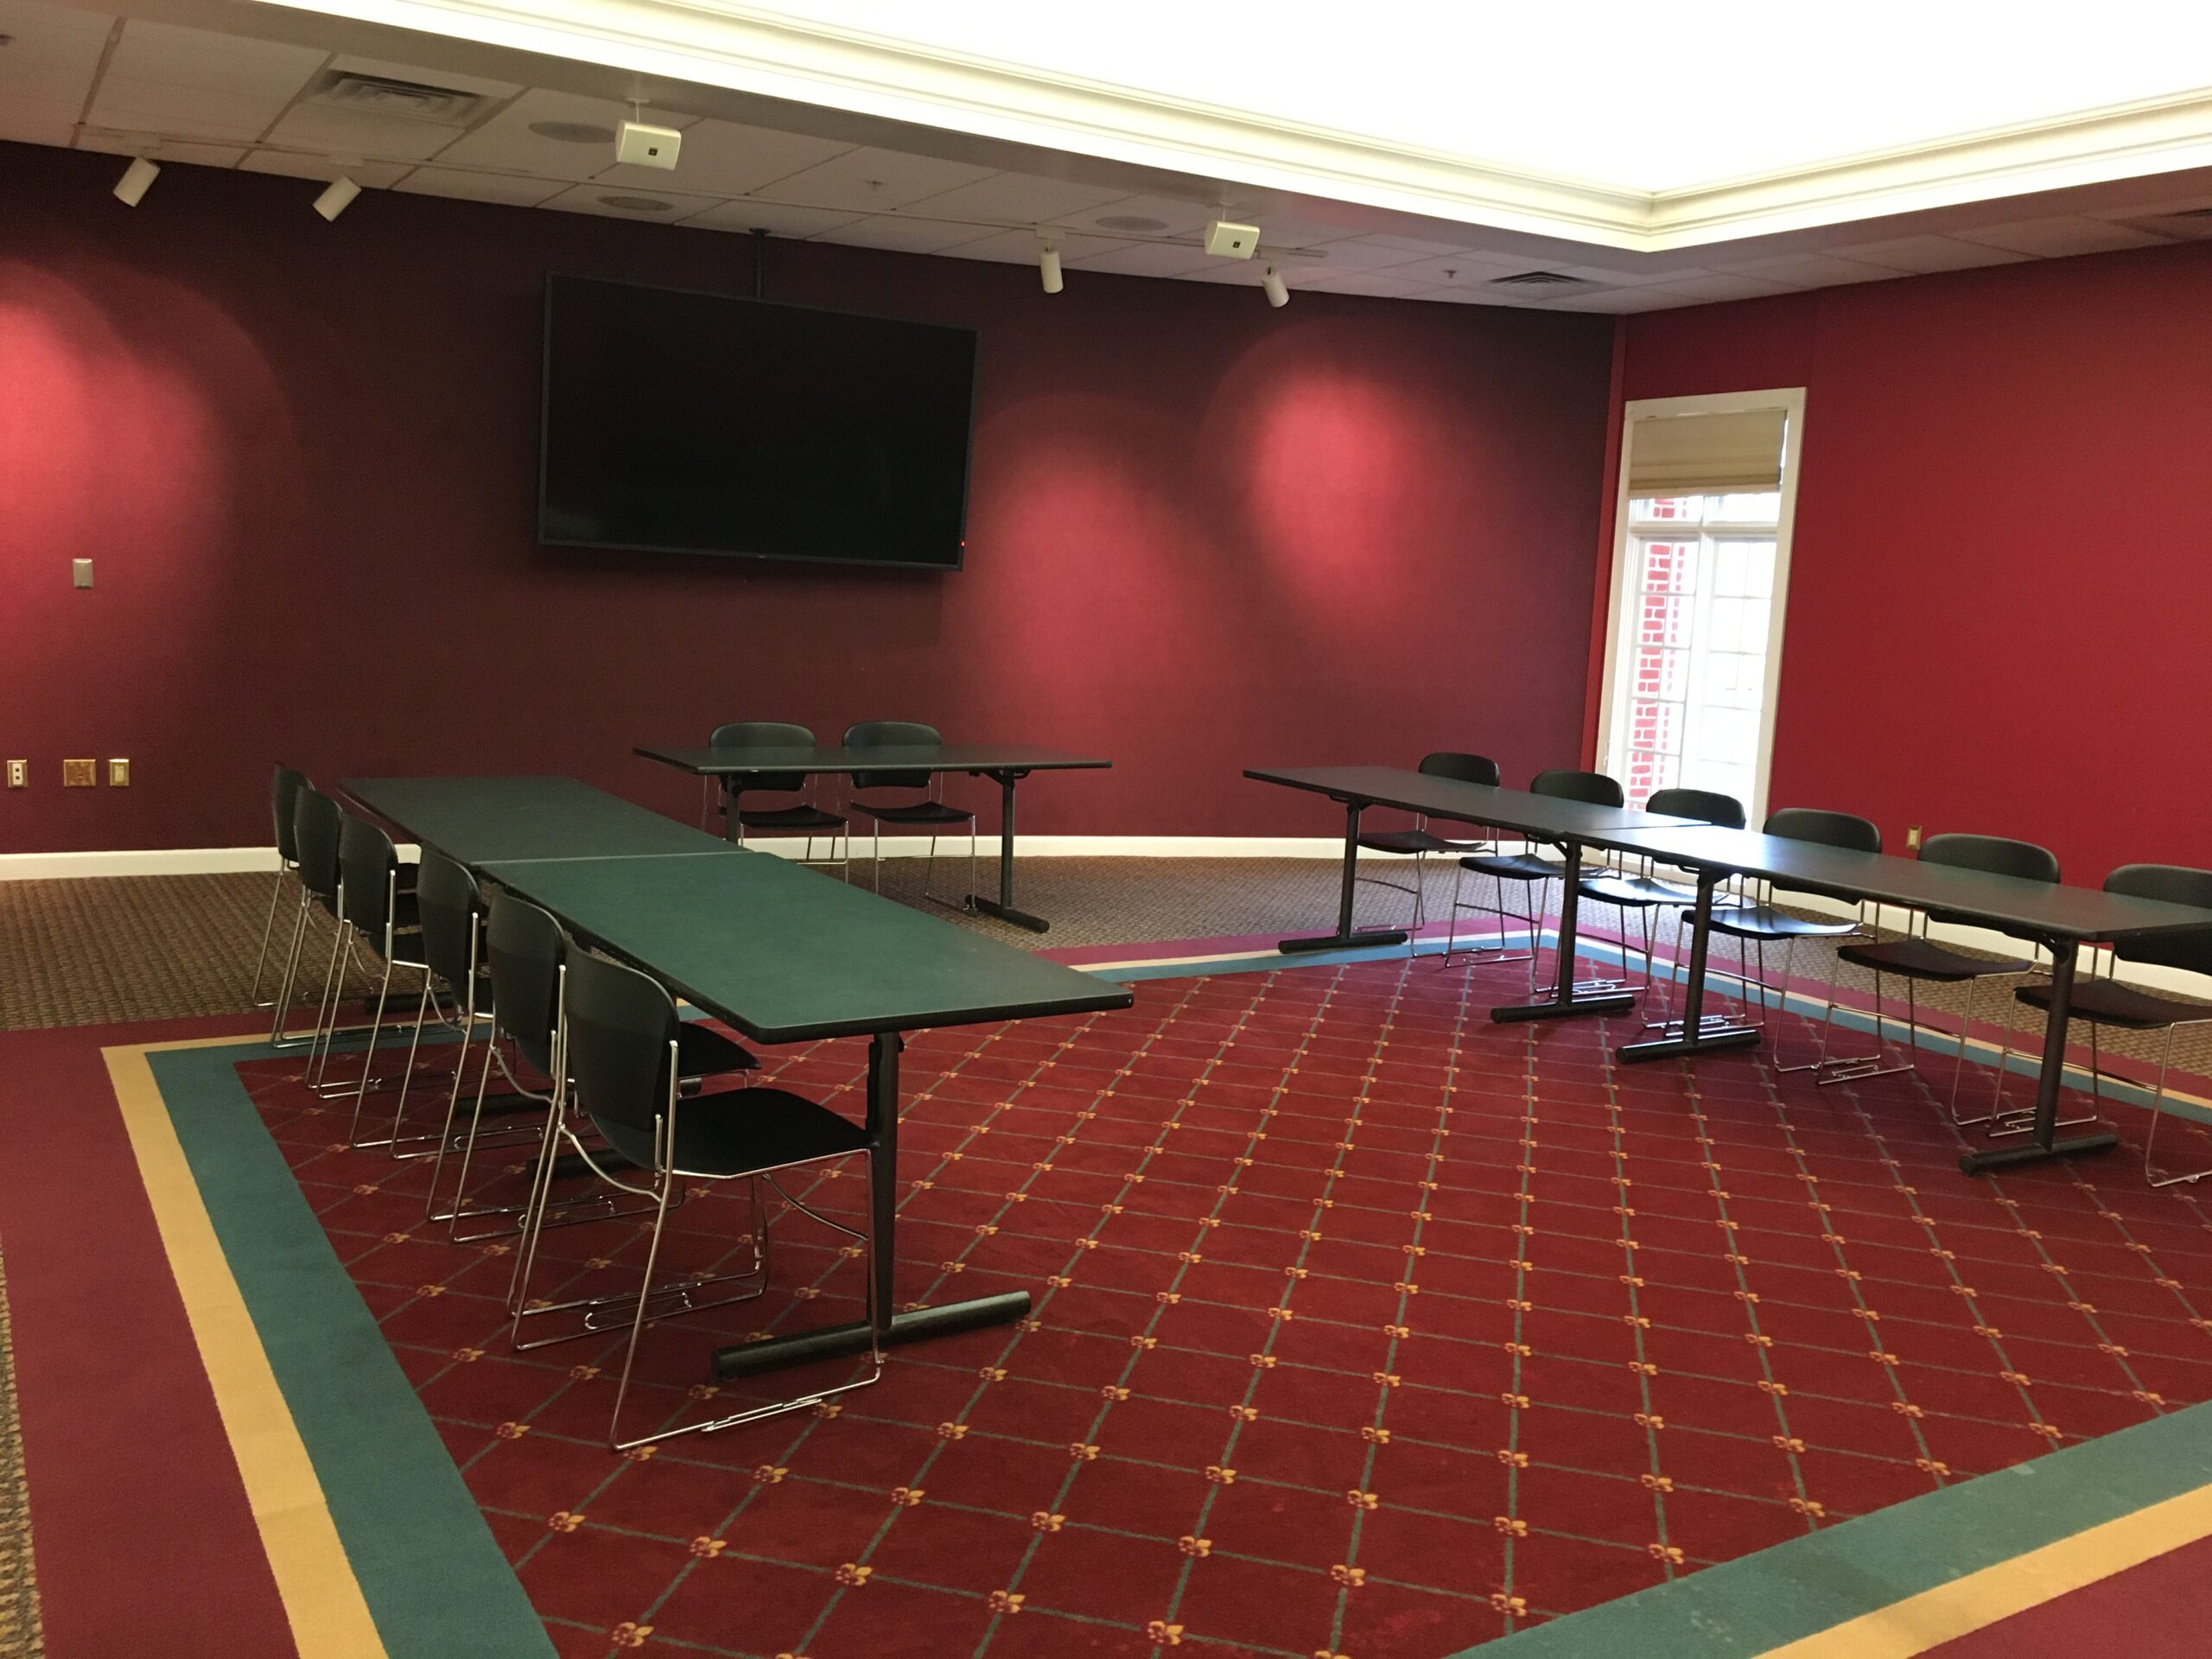 Dunning Room set up with chairs and tables